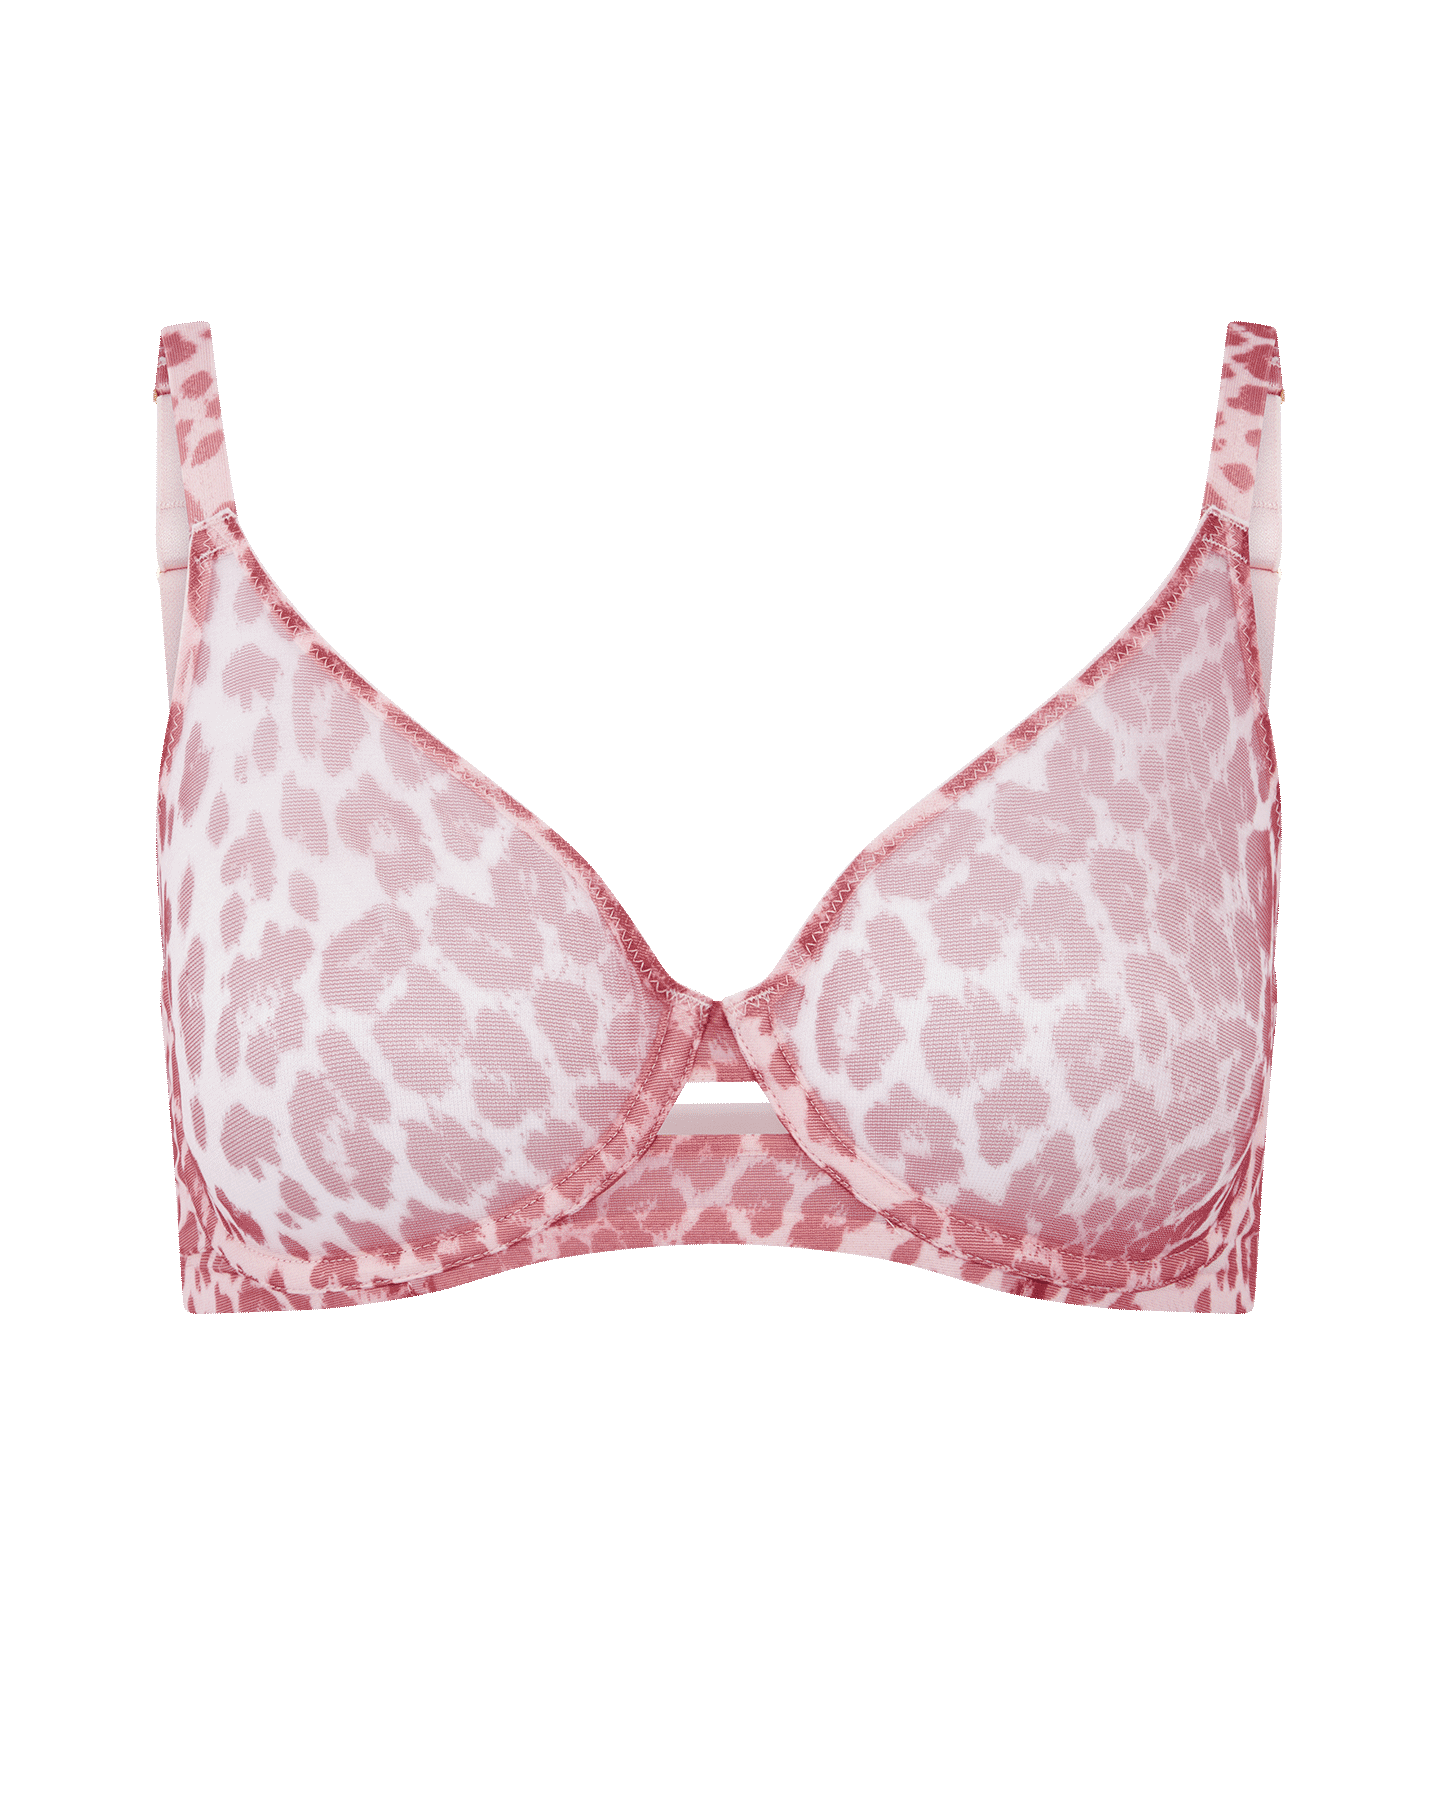 White Pink Leopard Print Bra Colorful Underwire Womens 34A SO Size  undefined - $13 - From Debbie